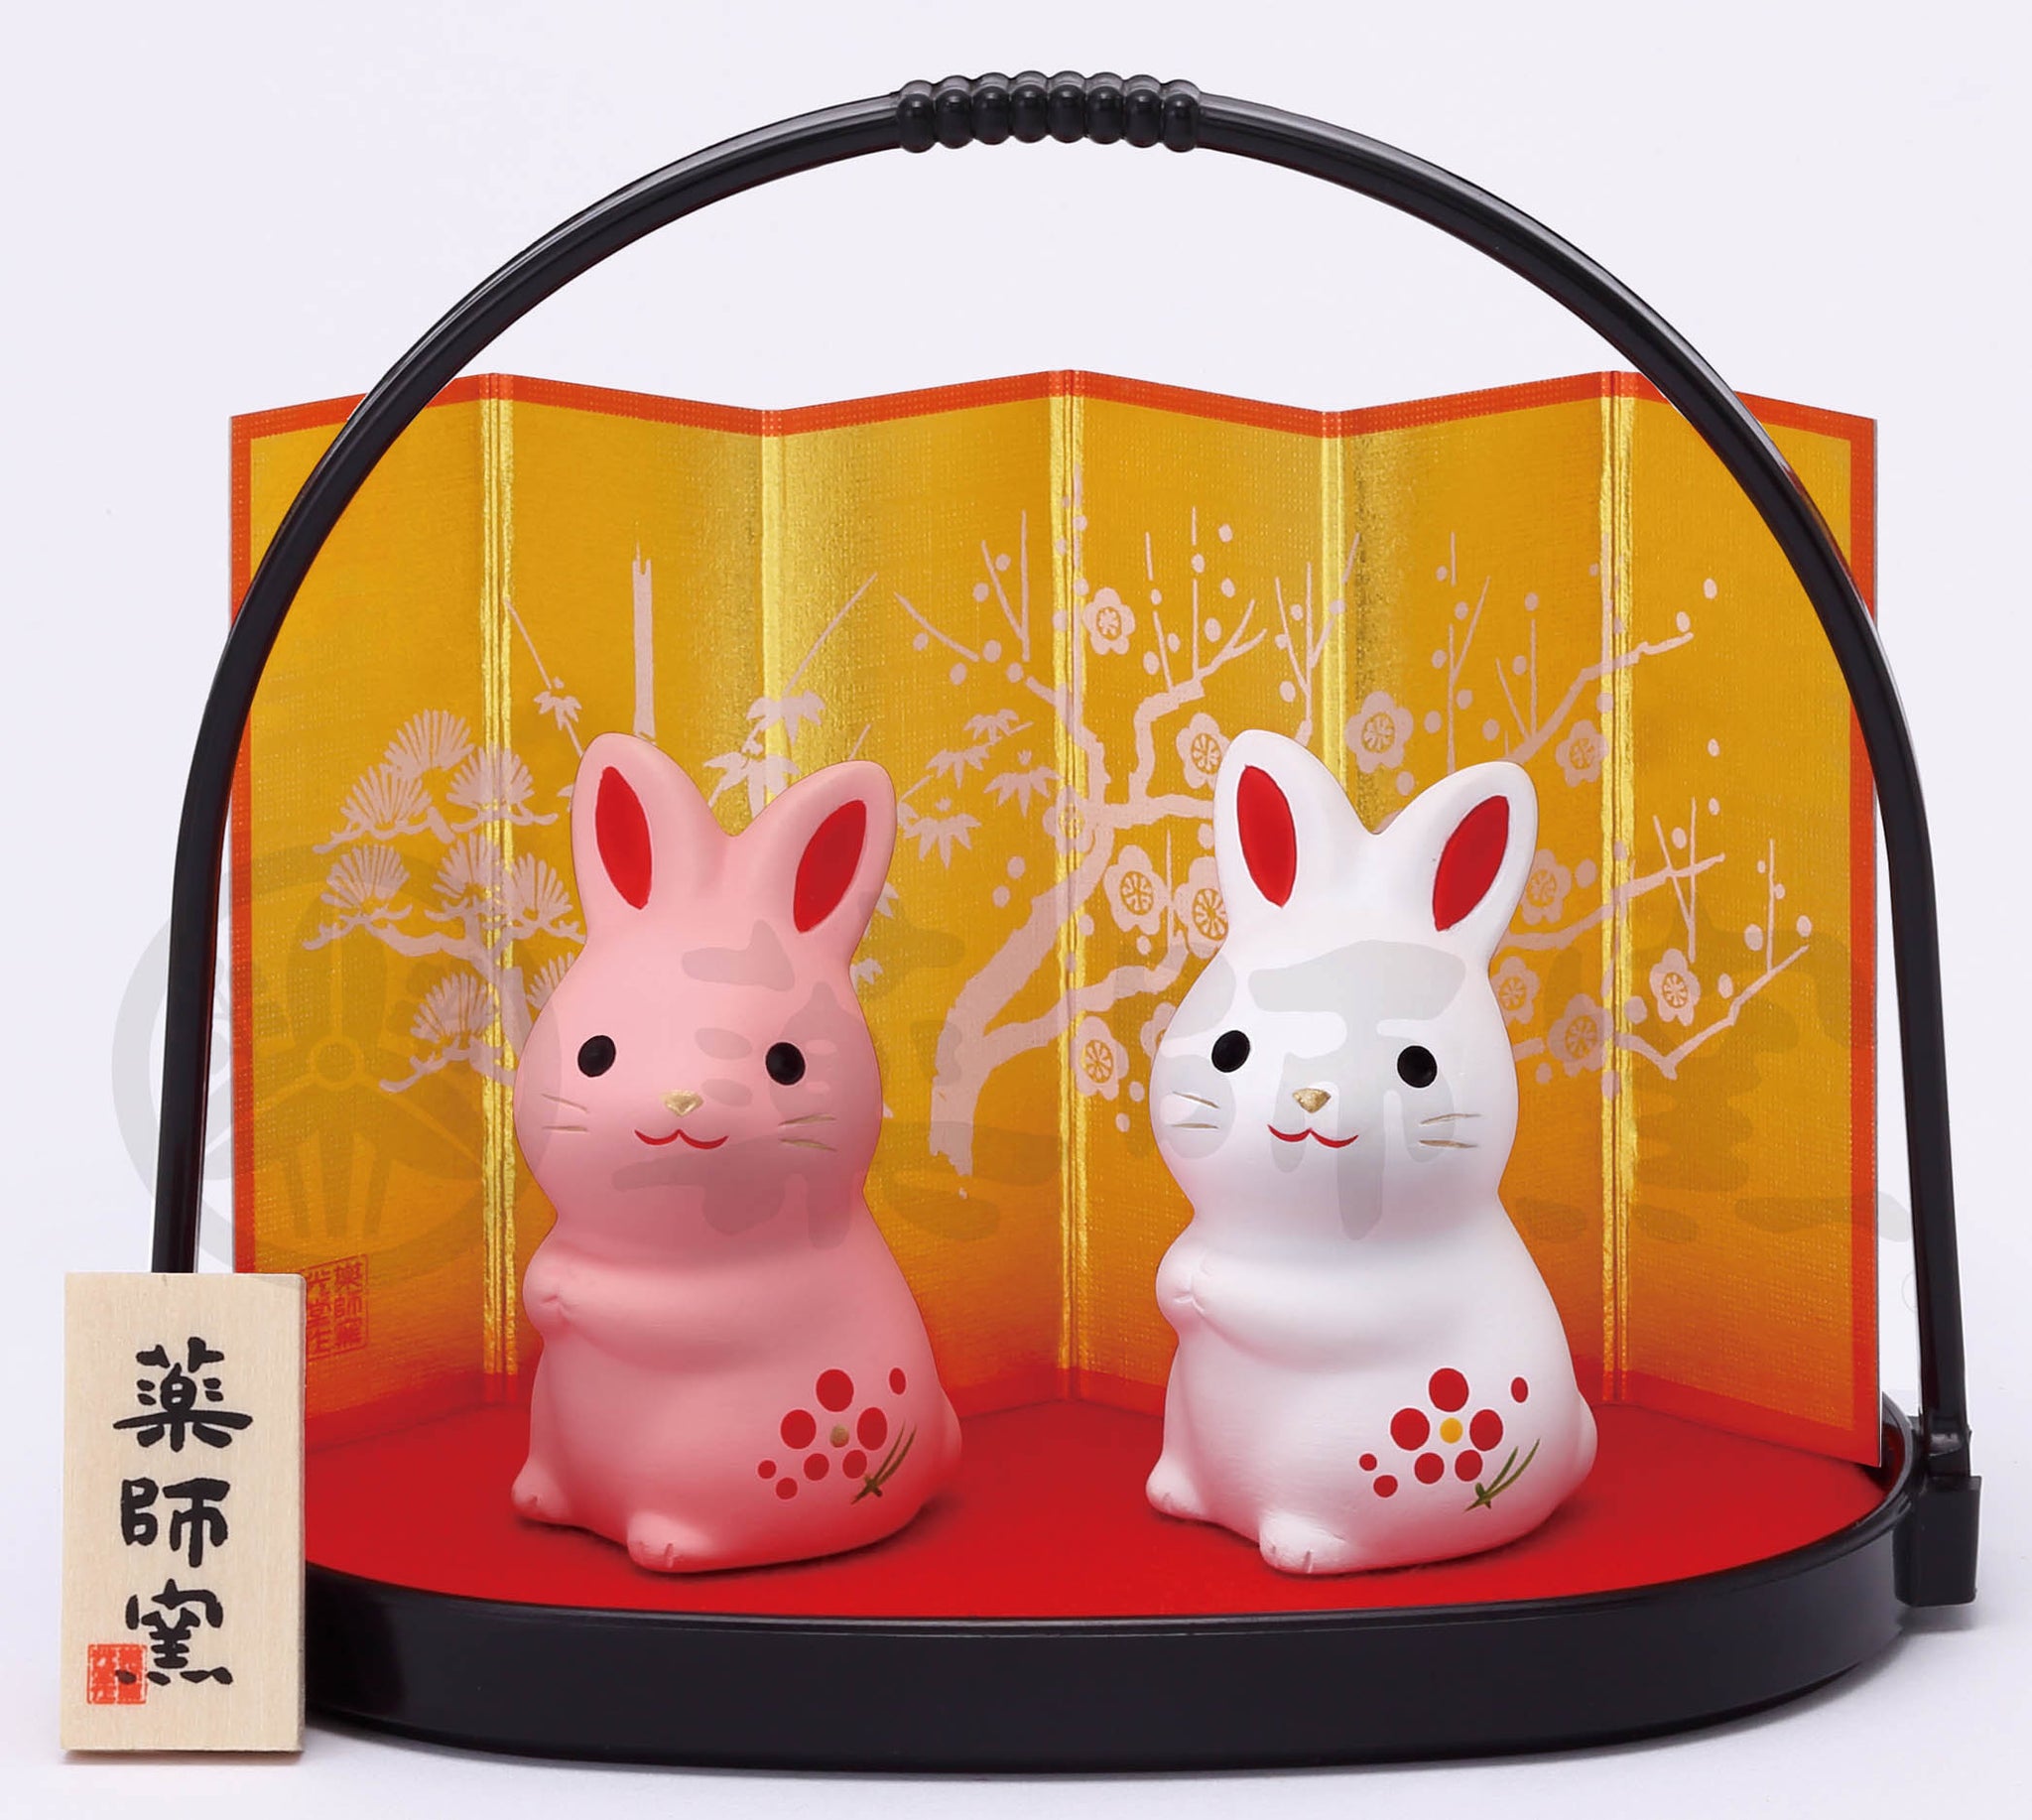 10 essential Chinese New Year decorations under $10 from Taobao